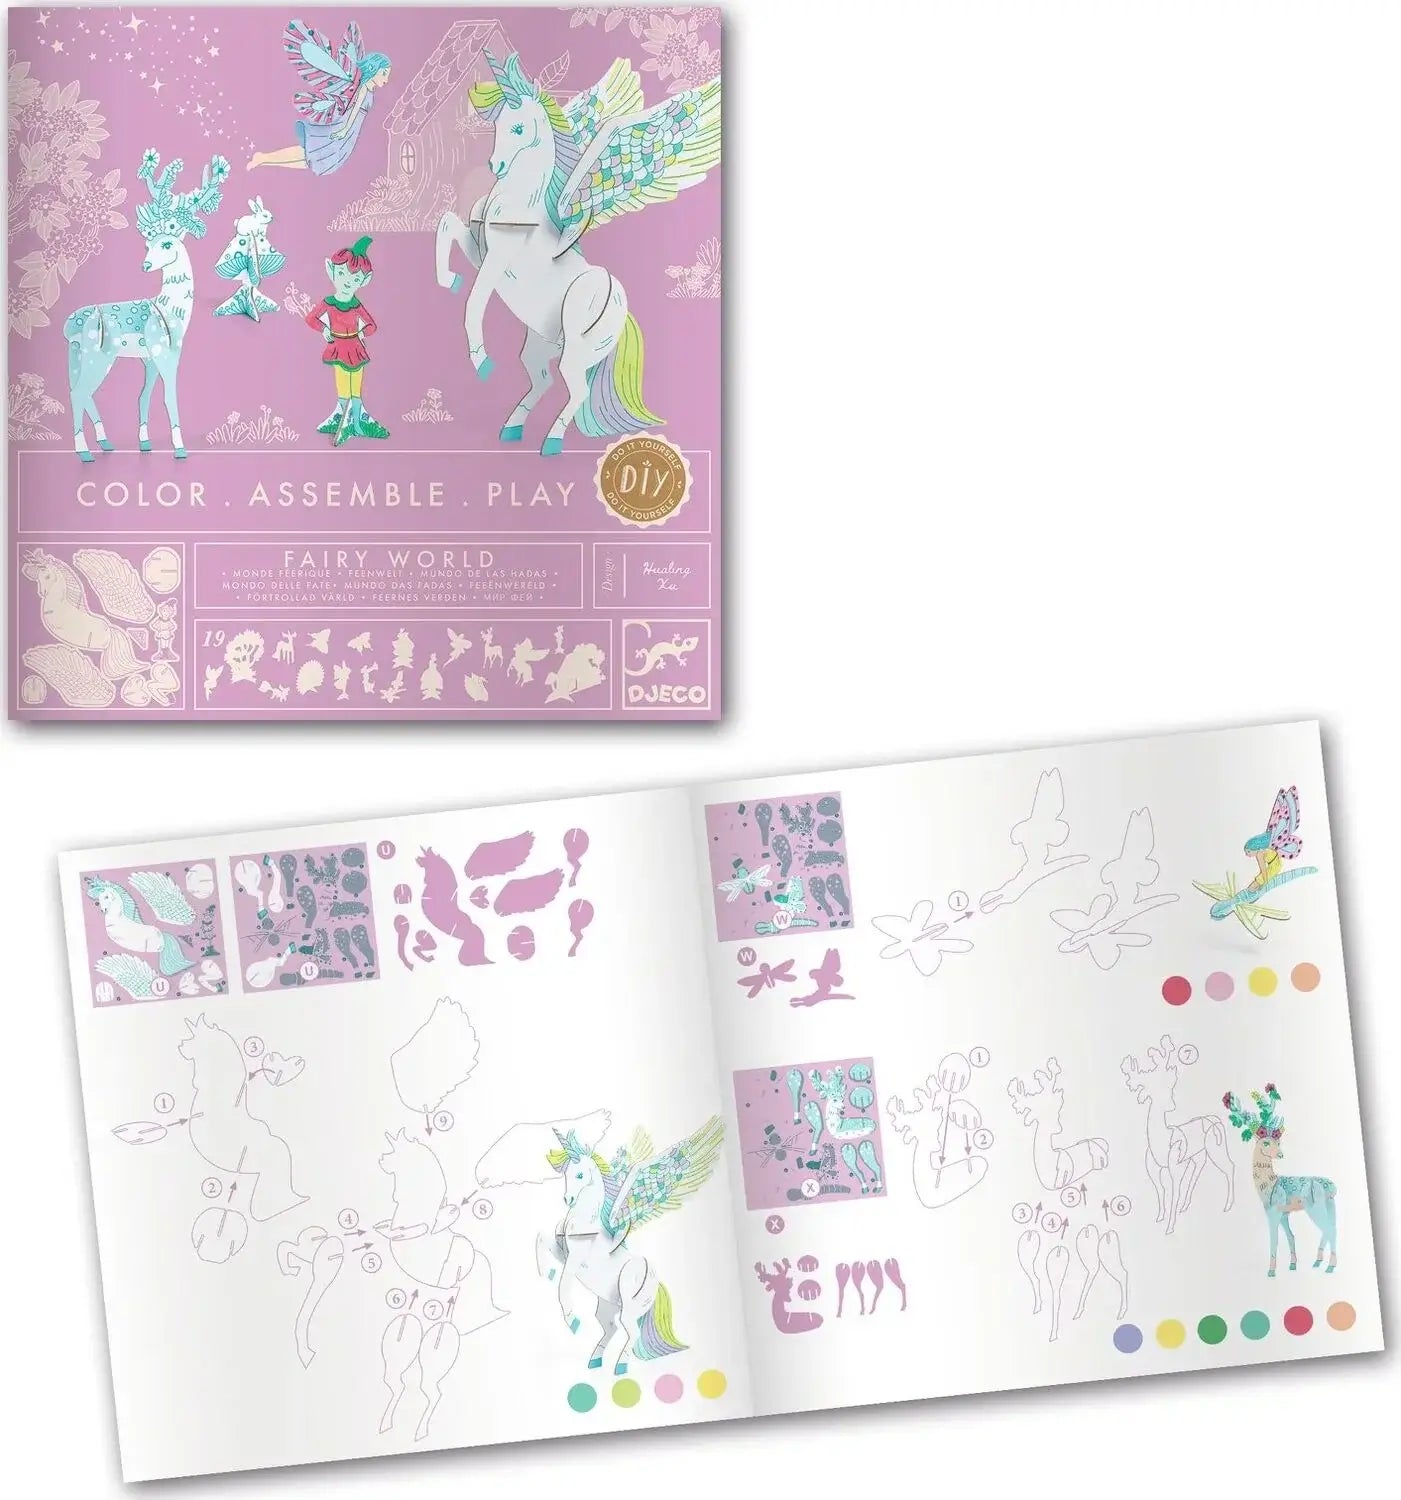 Fairy World Color Assemble & Play Kit for ages 5 and Up